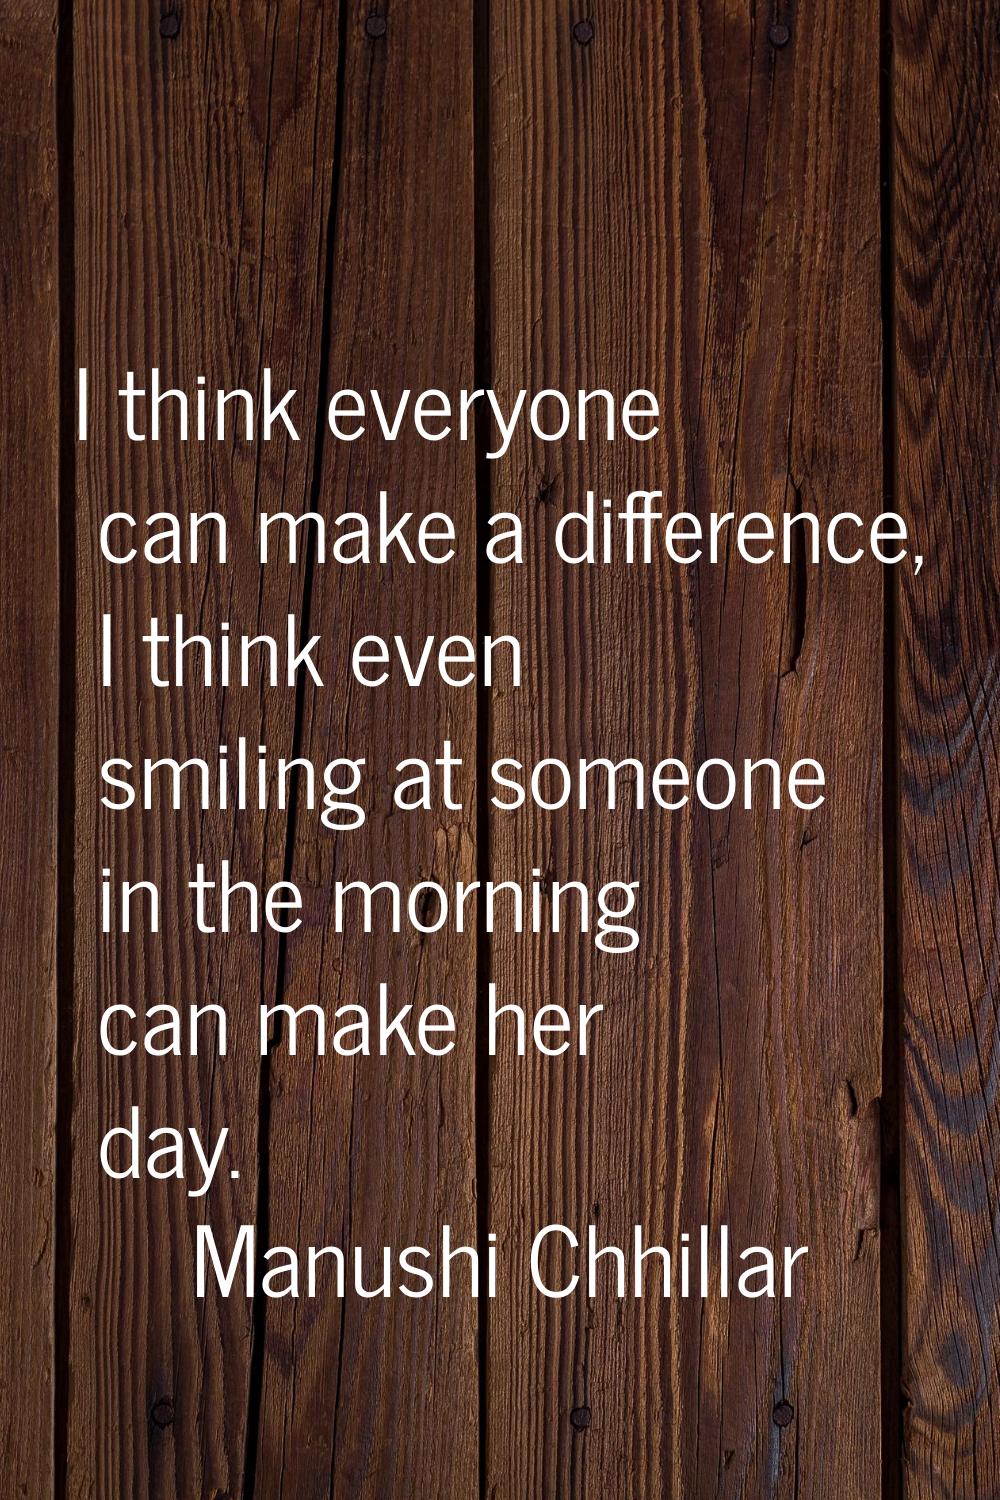 I think everyone can make a difference, I think even smiling at someone in the morning can make her